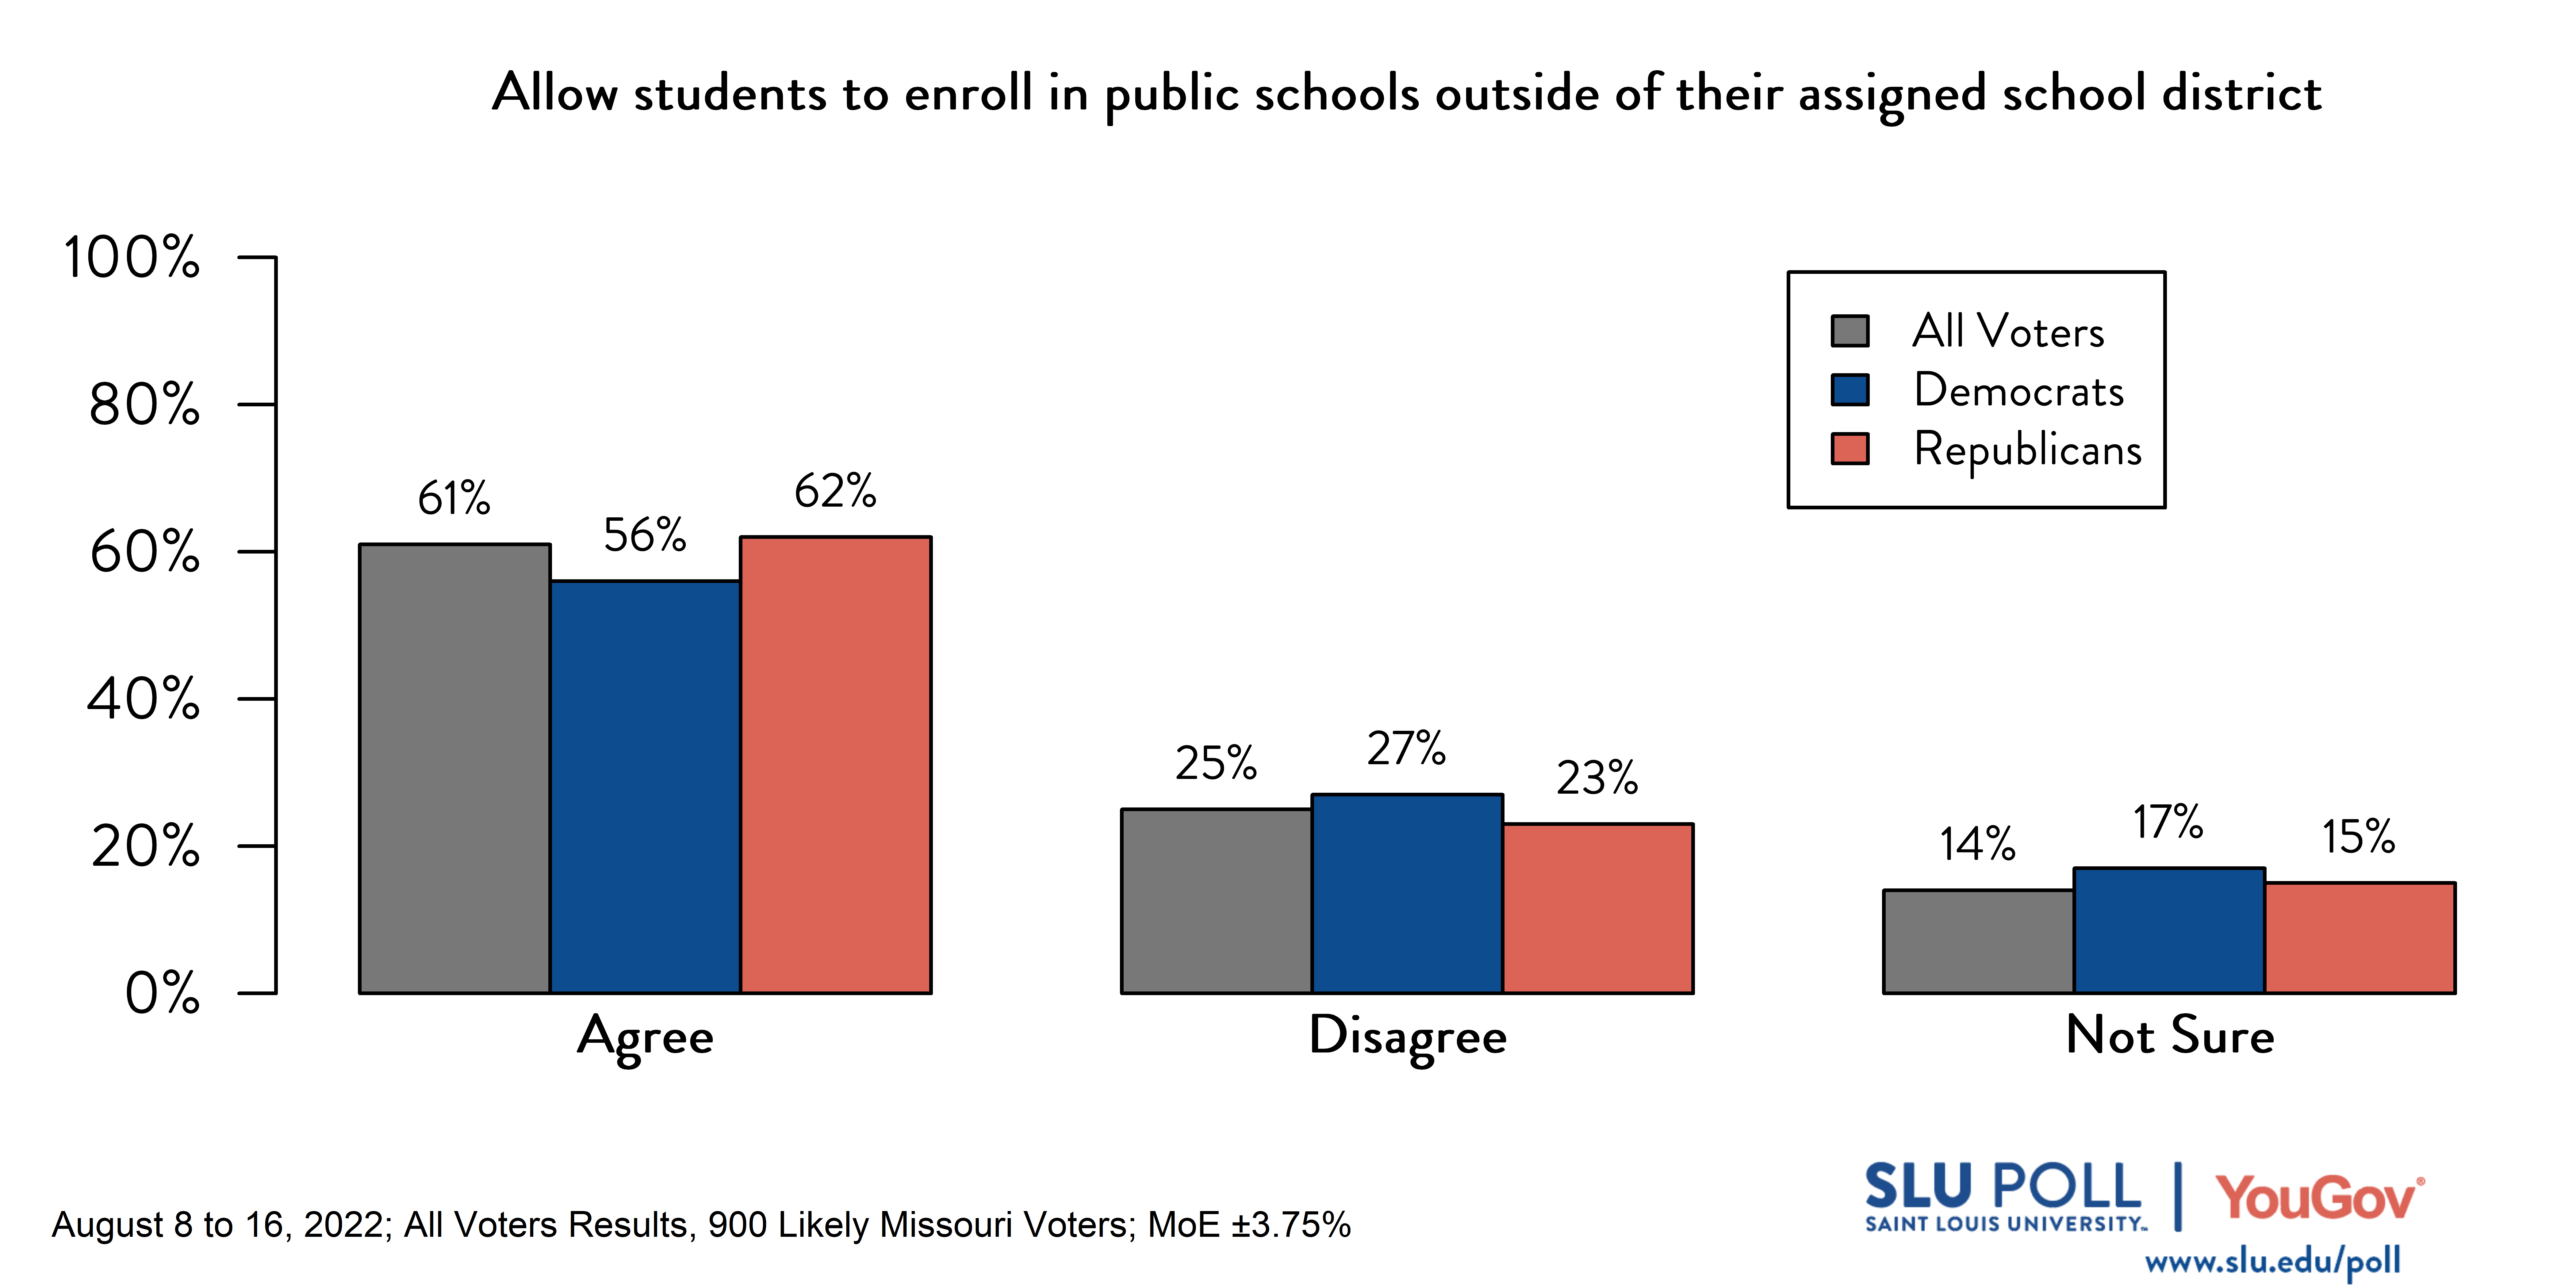 Likely voters' responses to 'Do you agree or disagree with the following statements?�Allow students to enroll in public schools outside of their assigned school district.': 61% Agree, 25% Disagree, and 14% Not Sure. Democratic voters' responses: ' 56% Agree, 27% Disagree, and 17% Not Sure. Republican voters' responses: 62% Agree, 23% Disagree, and 15% Not Sure.